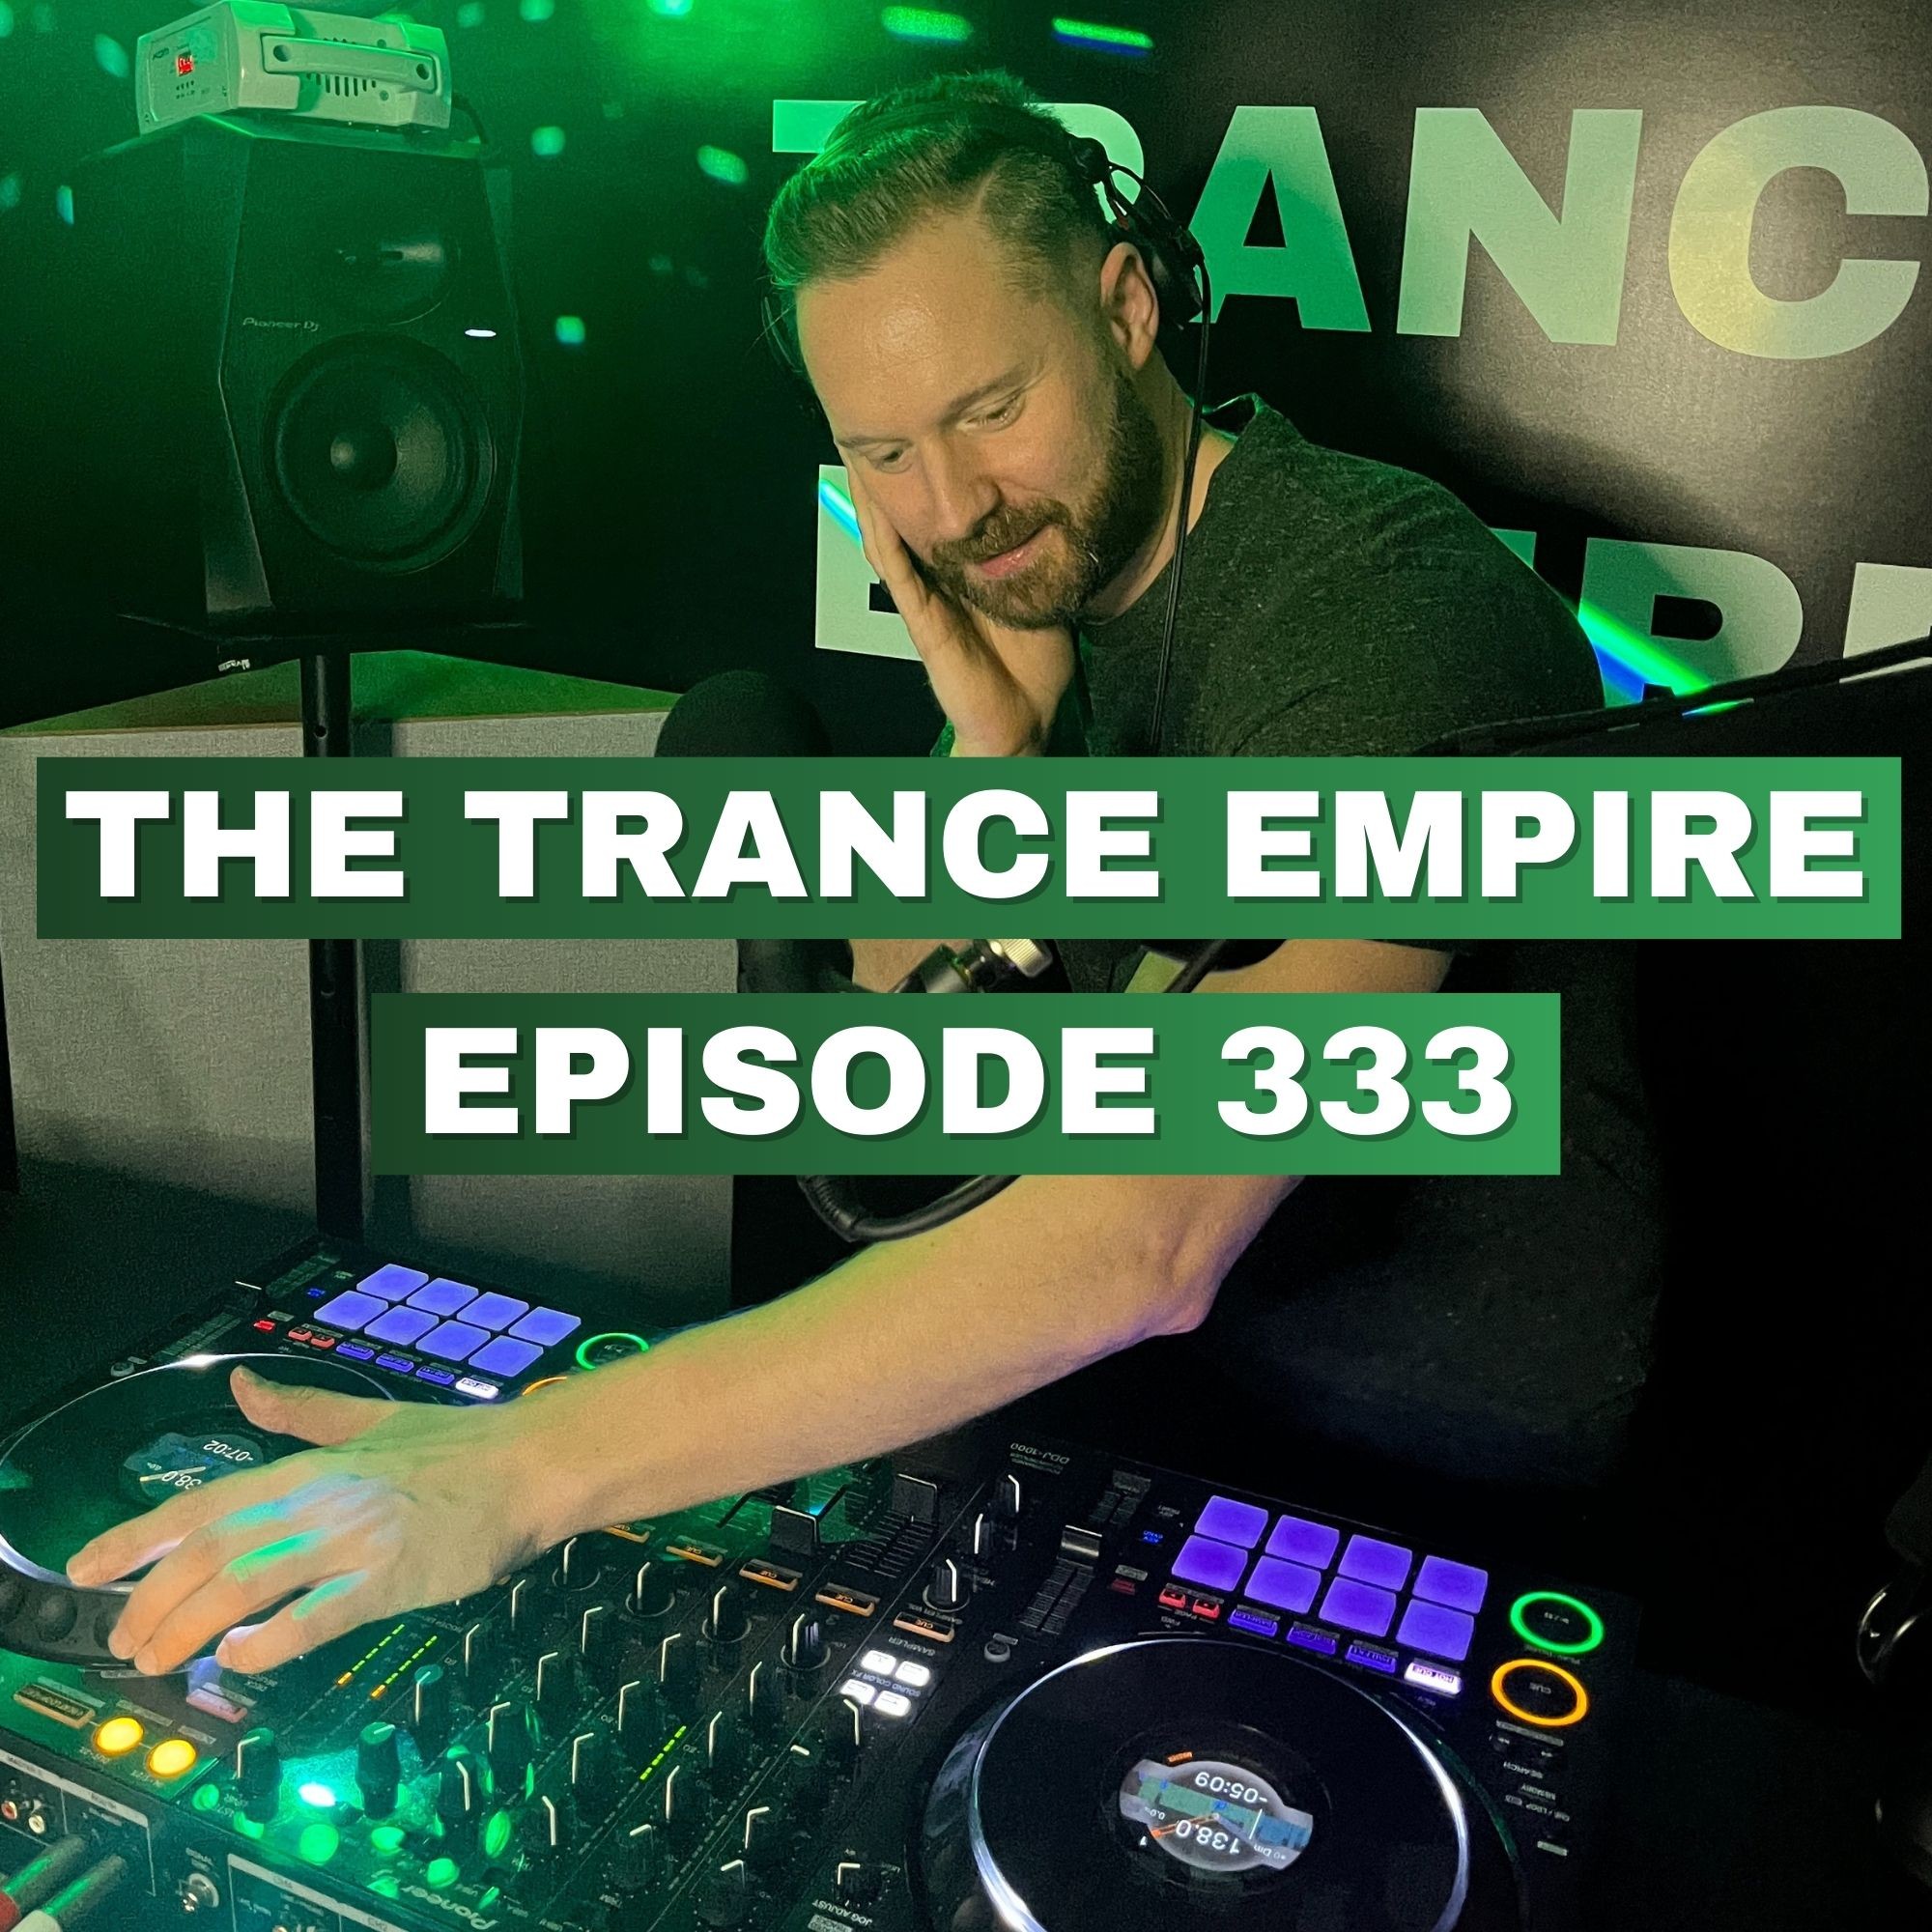 THE TRANCE EMPIRE episode 333 with Rodman